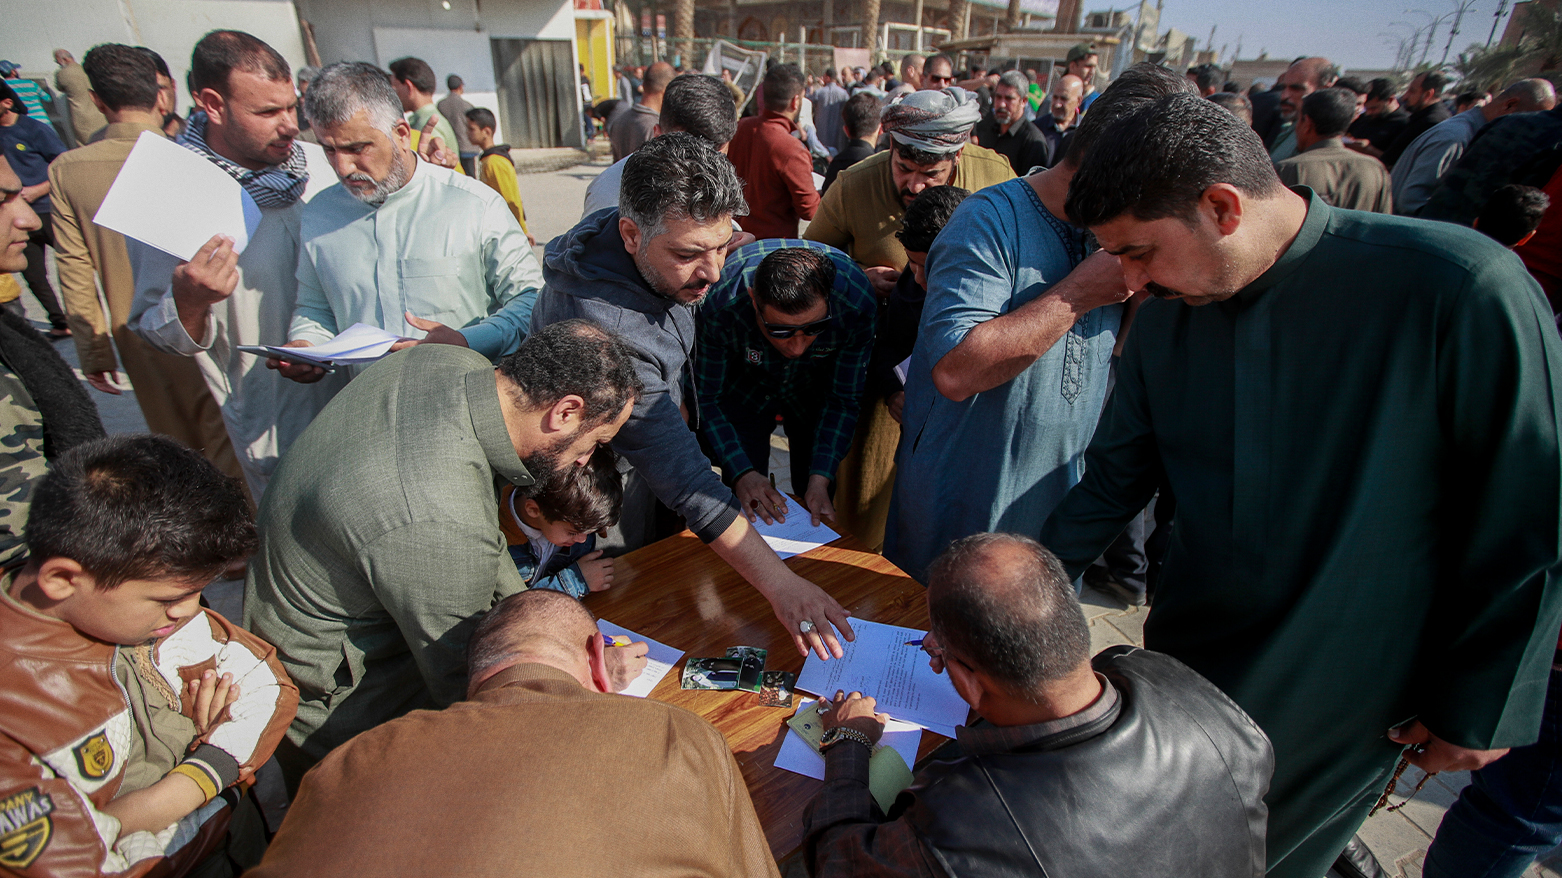 Supporters of the Shiite cleric Muqtada al-Sadr sign a pledge to stand against homosexuality or LGBTQ, outside a mosque in Kufa, Iraq, Friday, Dec. 2, 2022. (Photo: AP)